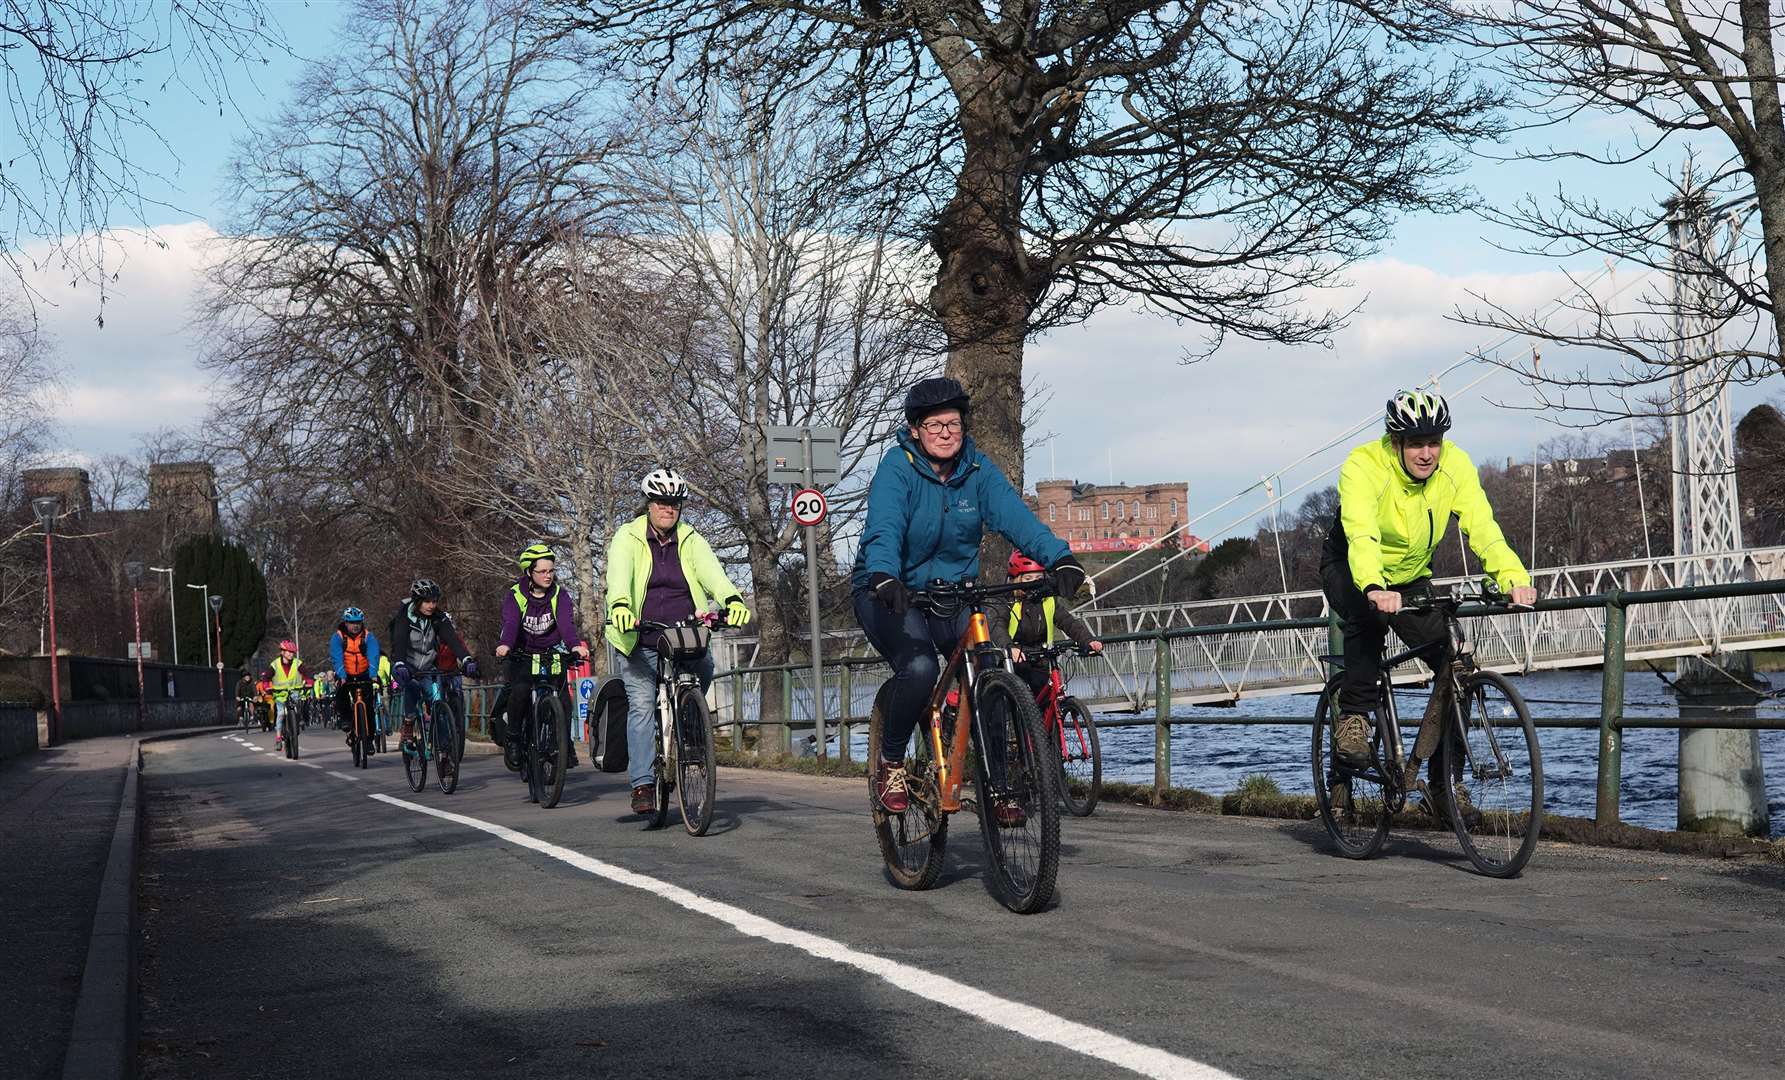 The Kidical Mass event in Inverness today.